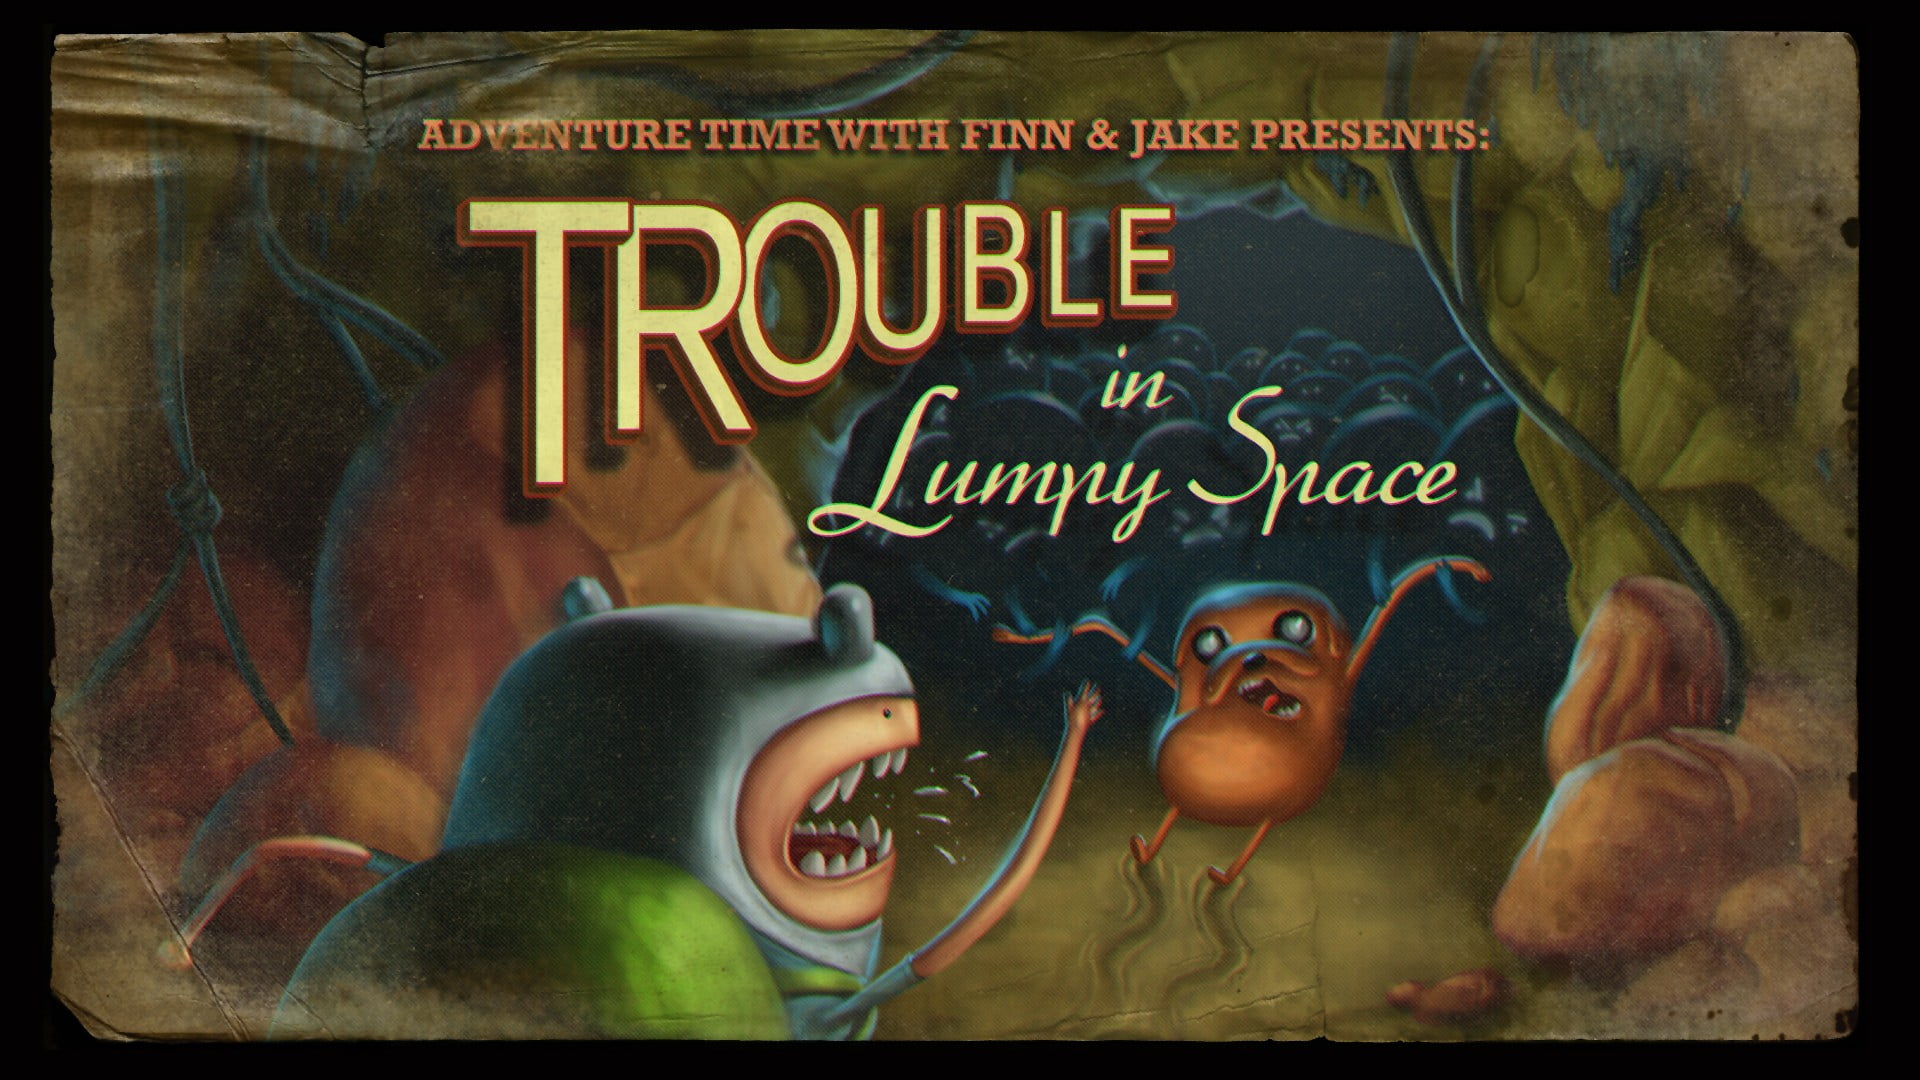 Adventure Time Trouble in Lumpy Space episode, Adventure Time, Jake the Dog, Finn the Human